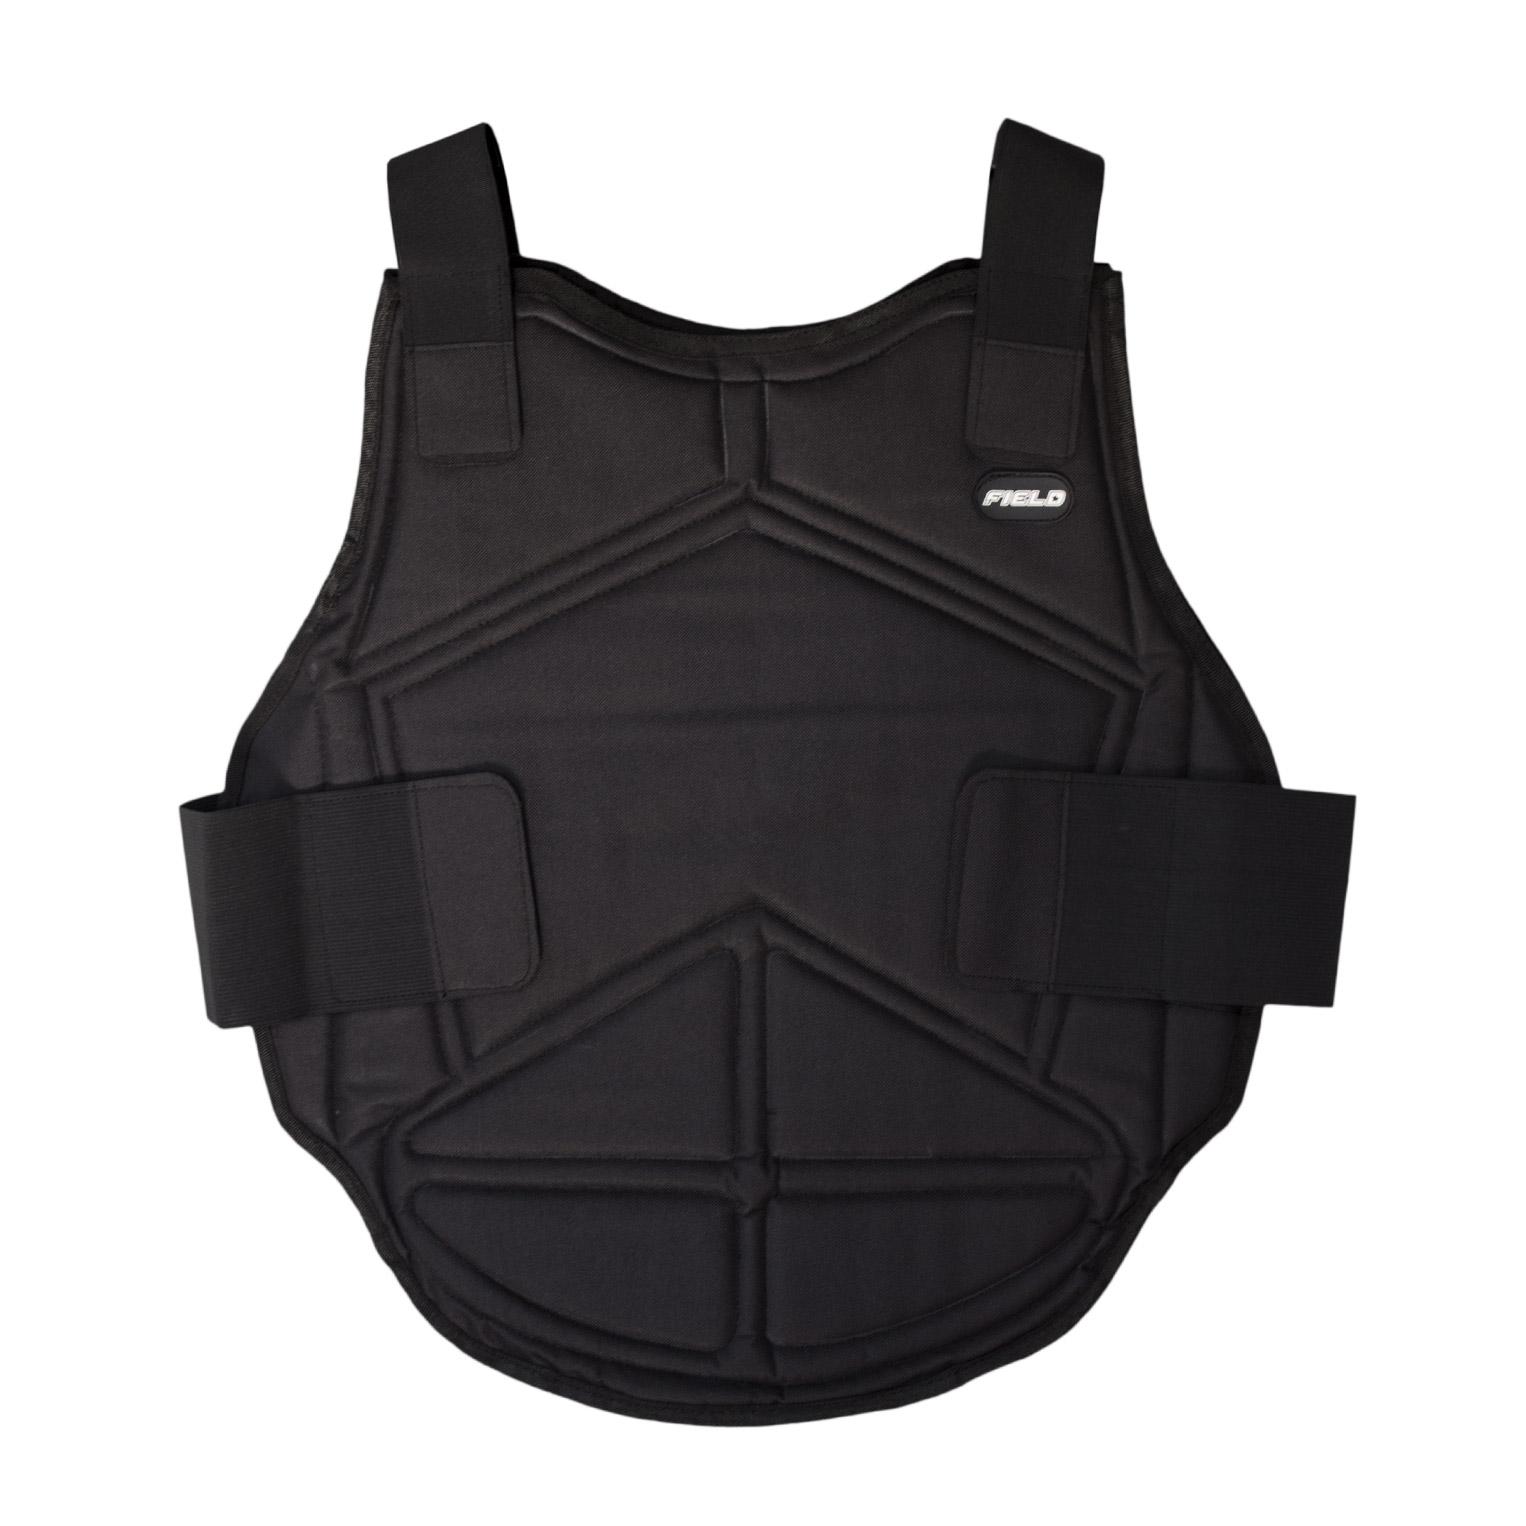 Chest Protector Field Black - Adult